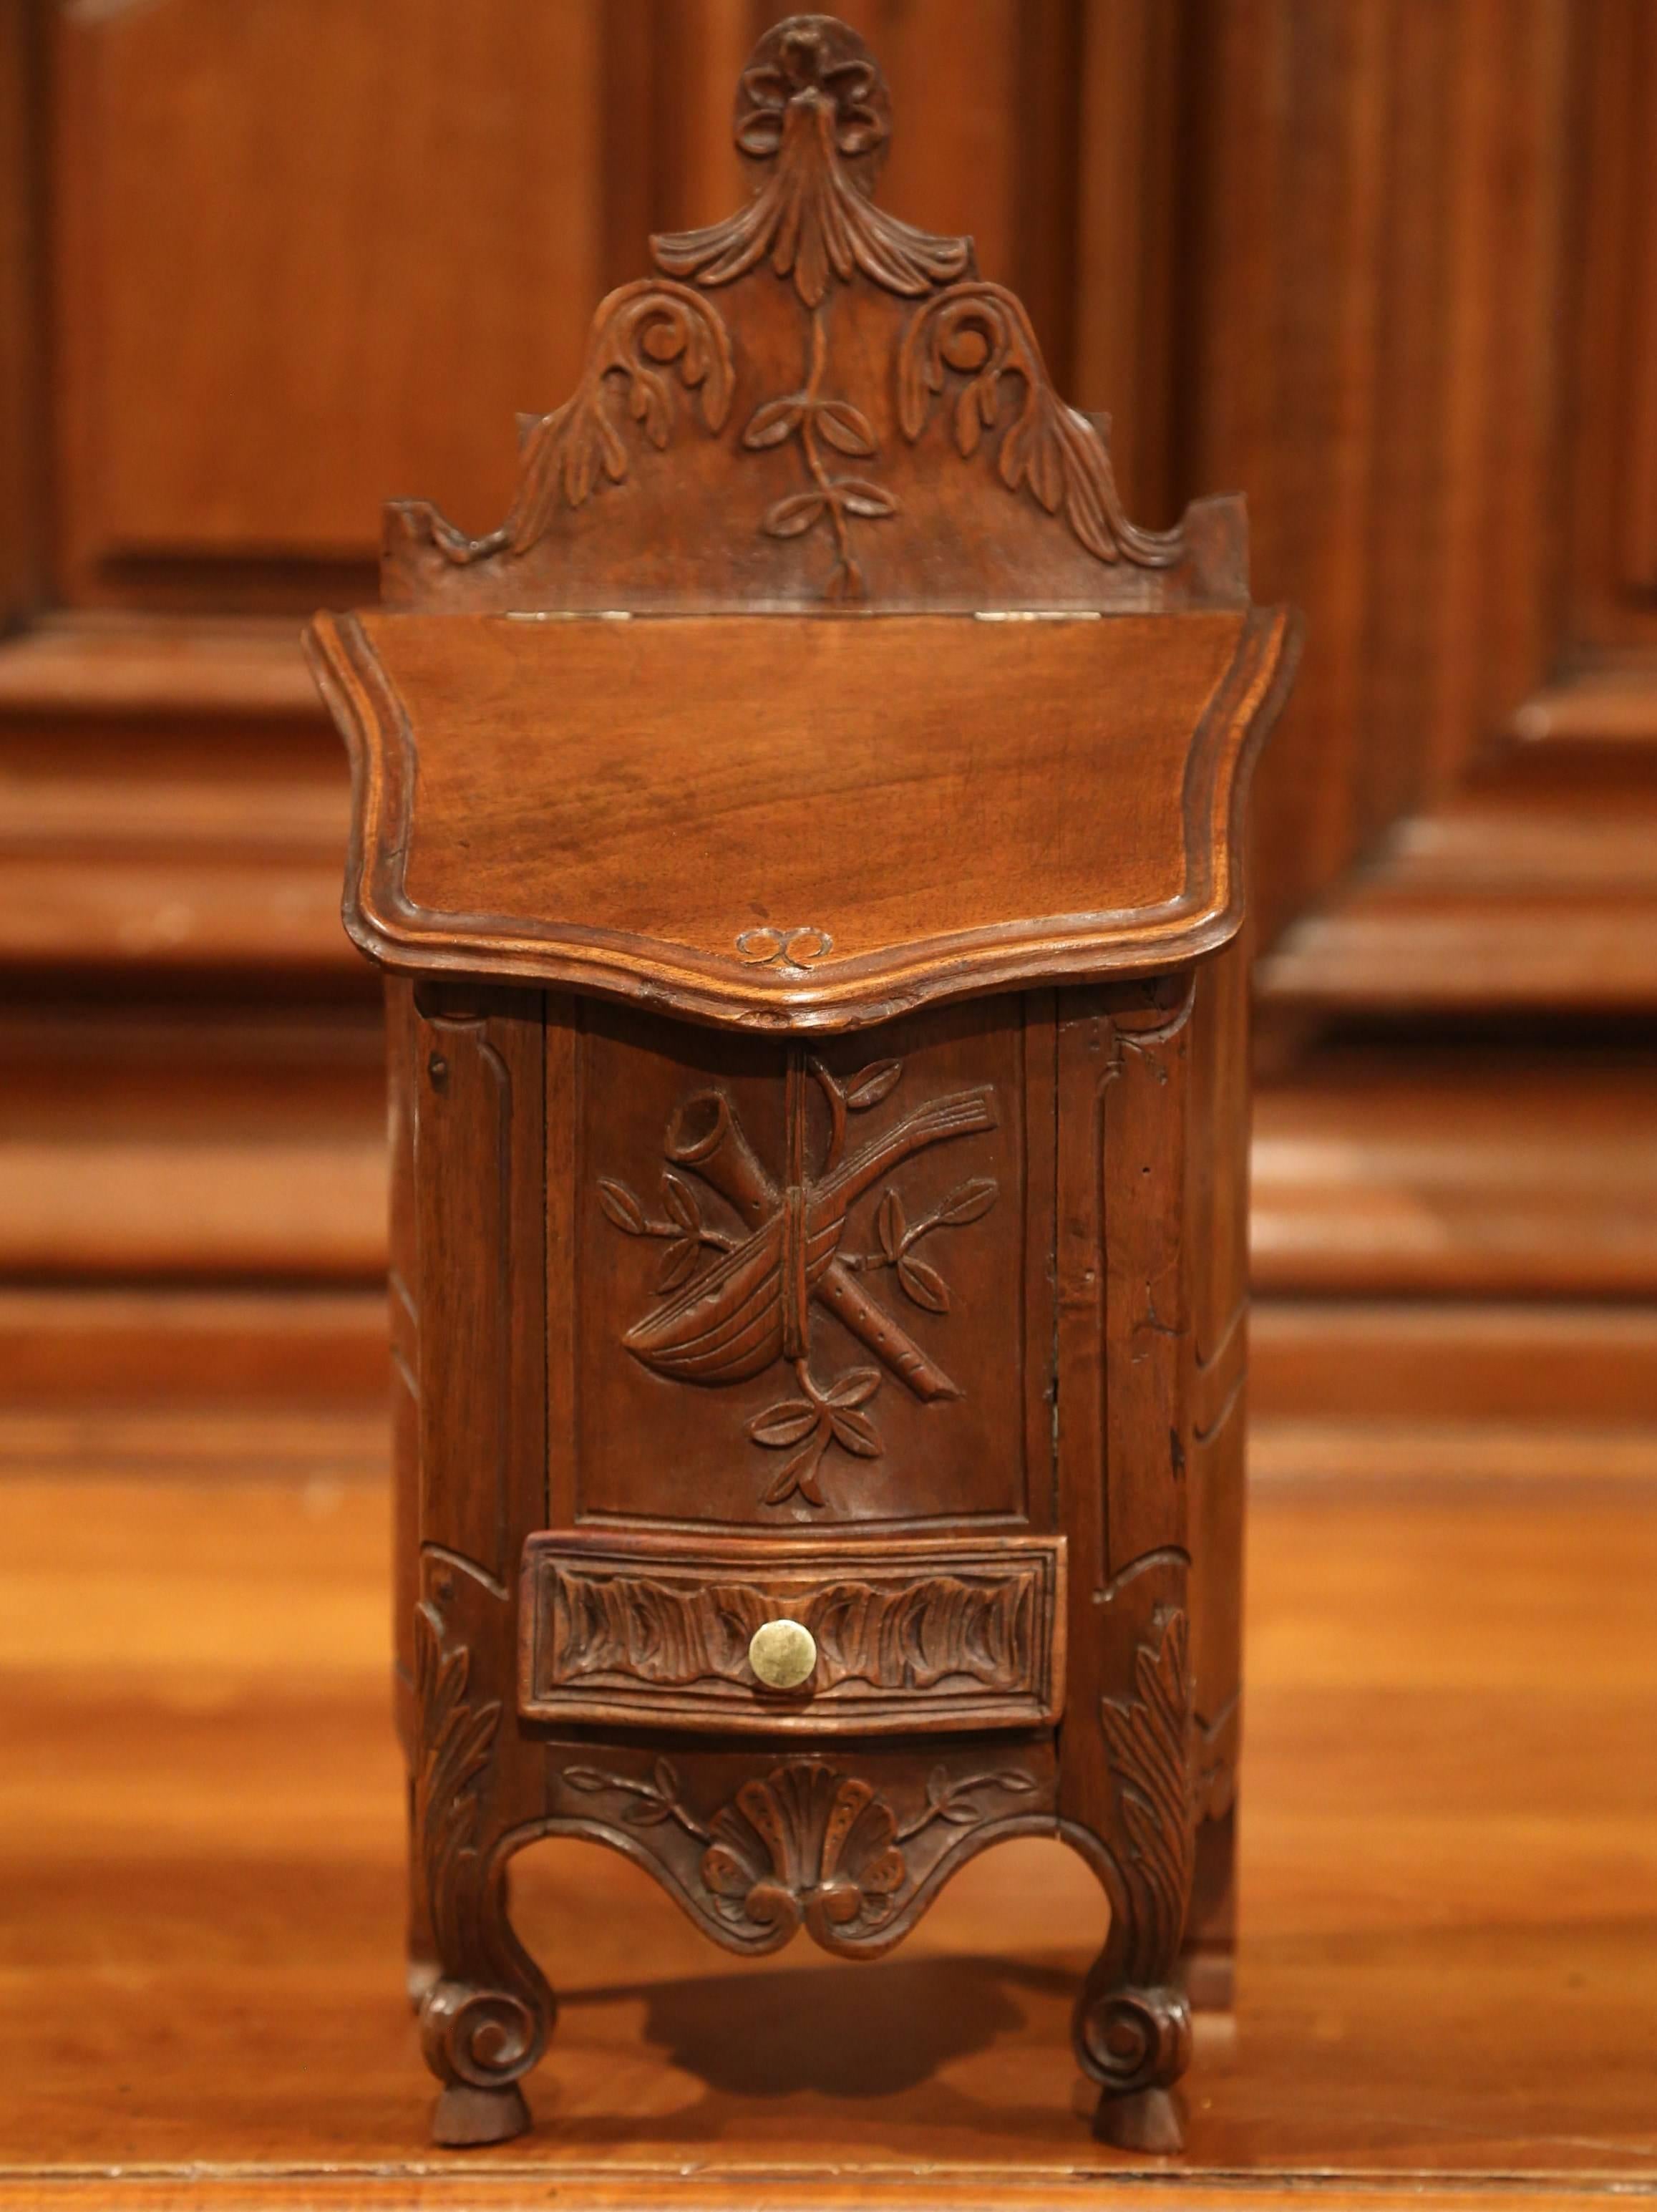 This elegant, antique fruitwood salt box was crafted in Avignon, France, circa 1920. The ornate walnut box features beautiful carved work throughout with music instruments and floral motifs, small scrolled feet, a usable drawer and an open top for